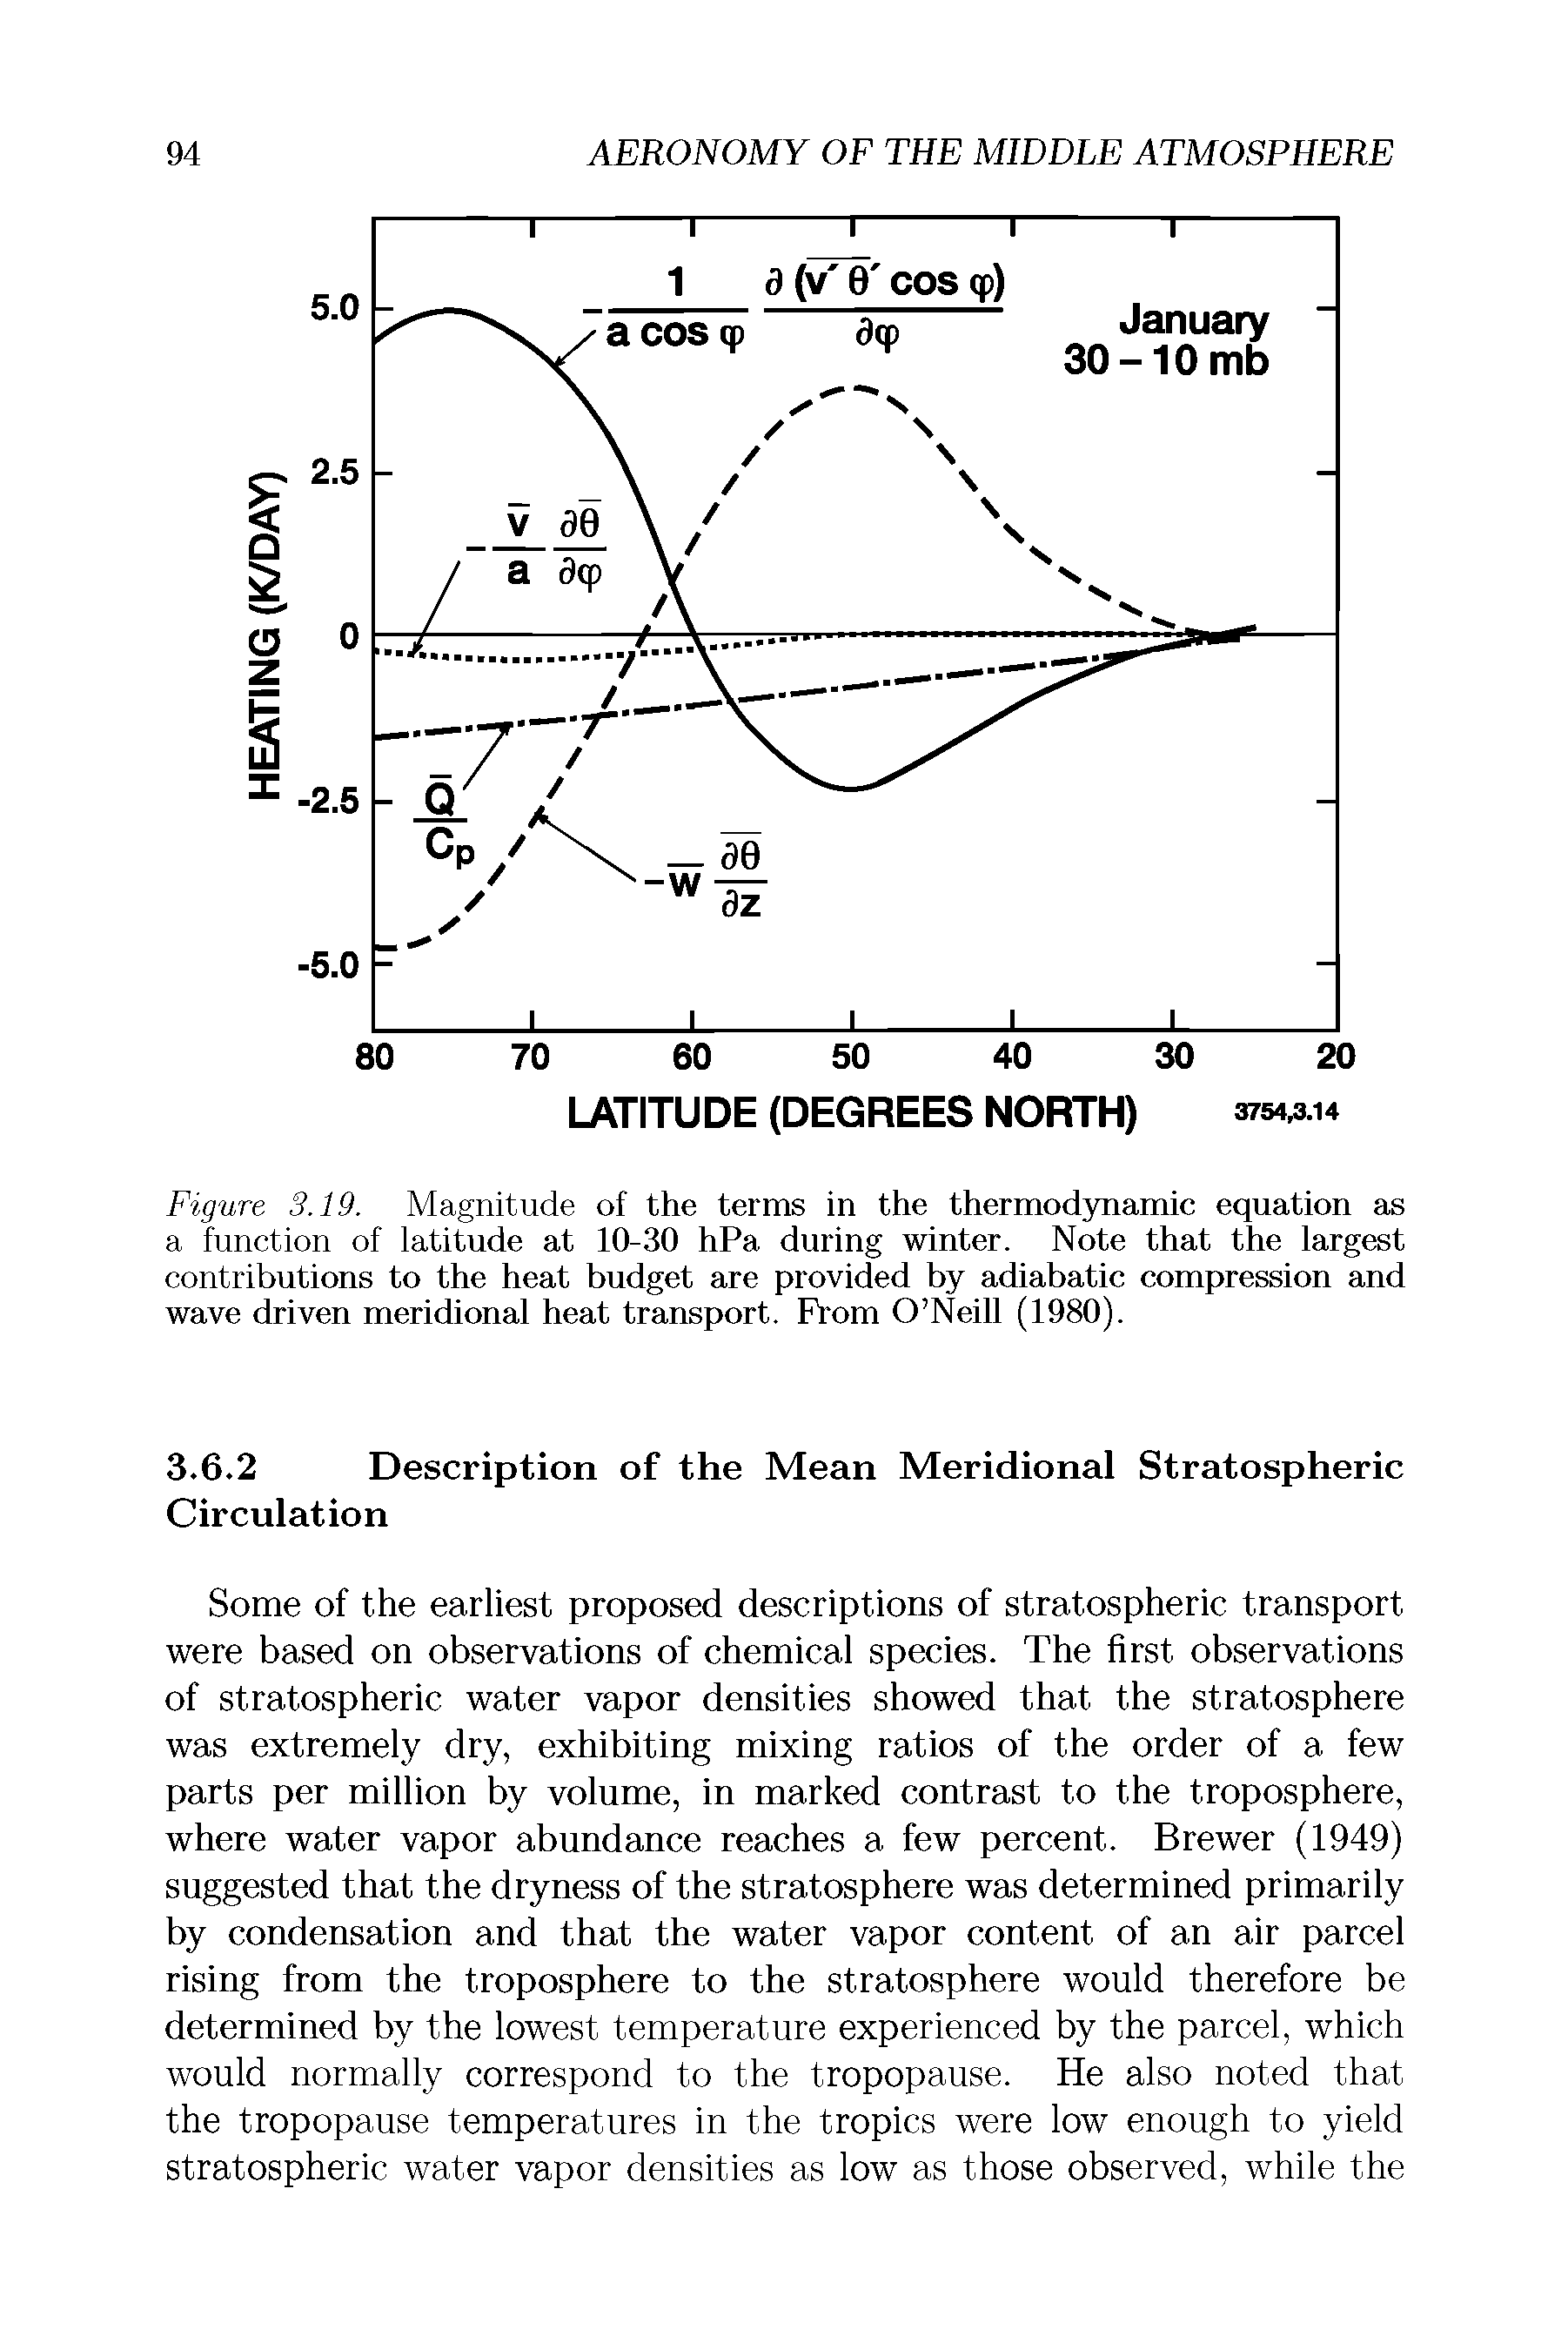 Figure 3.19. Magnitude of the terms in the thermodynamic equation as a function of latitude at 10-30 hPa during winter. Note that the largest contributions to the heat budget are provided by adiabatic compression and wave driven meridional heat transport. From O Neill (1980).